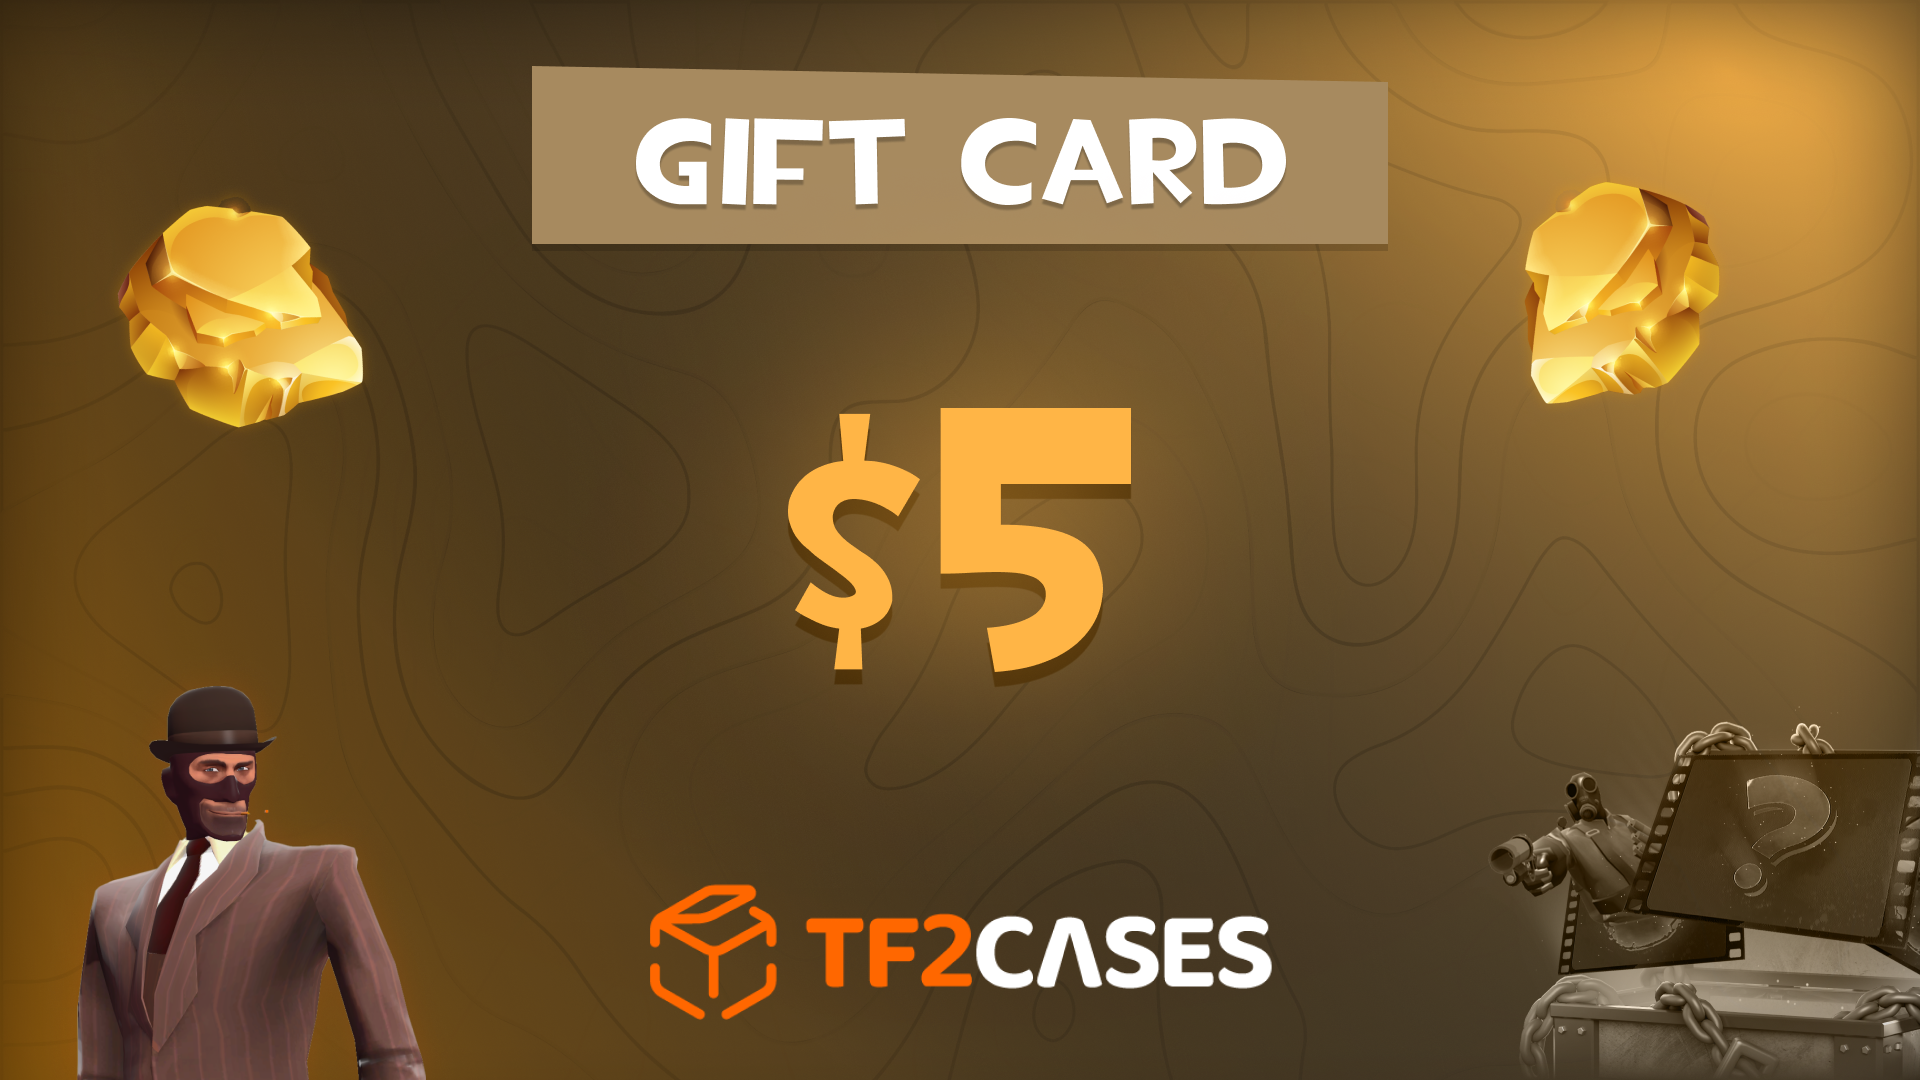 TF2CASES.com $5 Gift Card [USD 5.65]